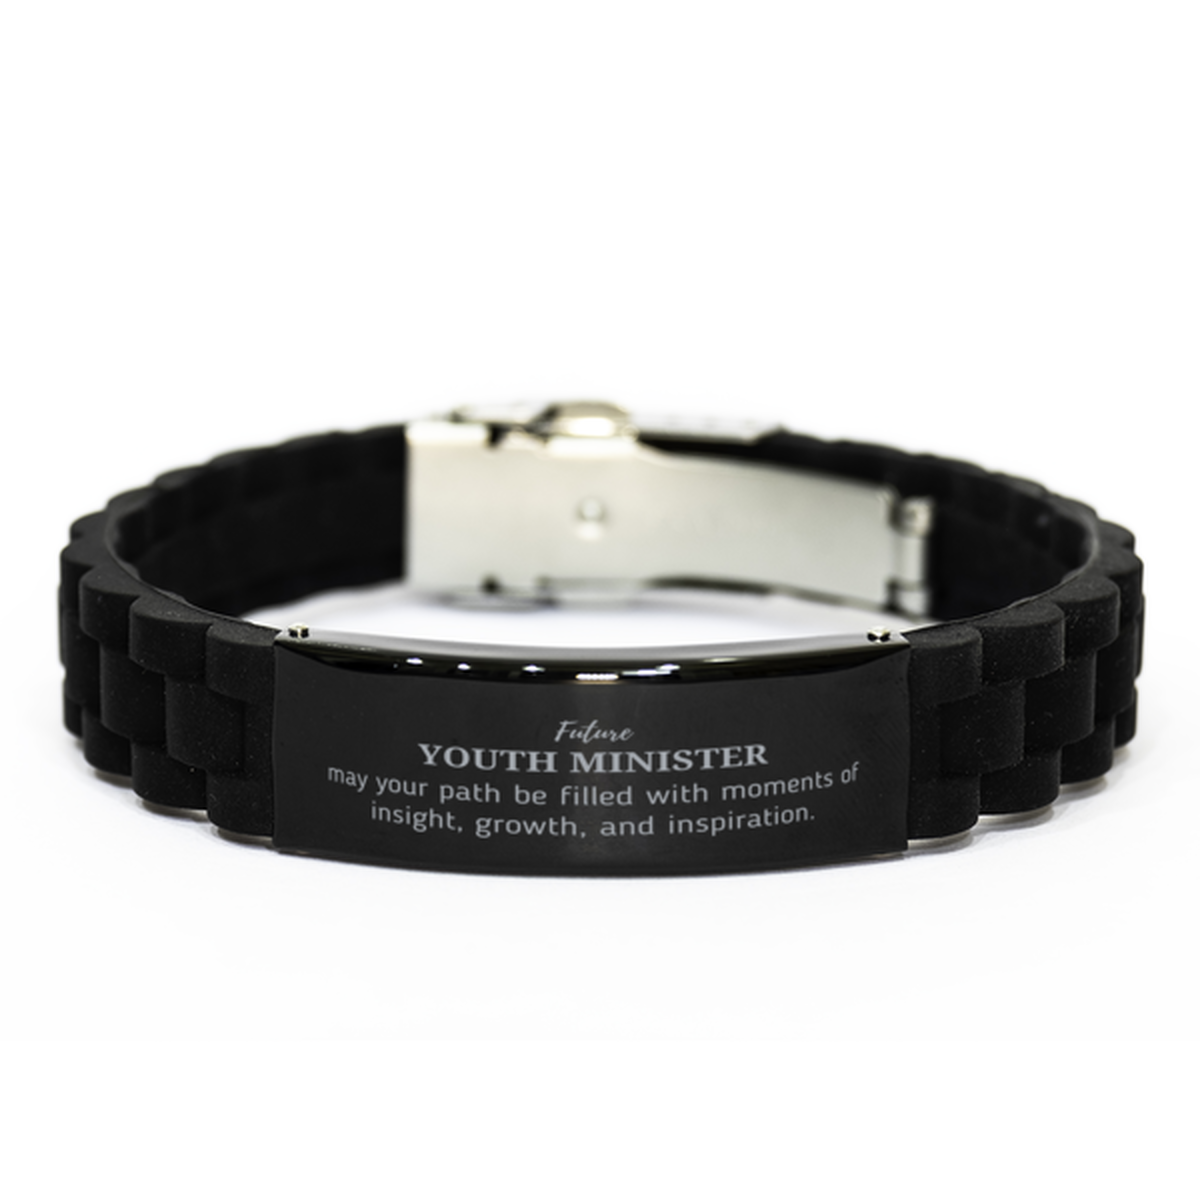 Future Youth Minister Gifts, May your path be filled with moments of insight, Graduation Gifts for New Youth Minister, Christmas Unique Black Glidelock Clasp Bracelet For Men, Women, Friends